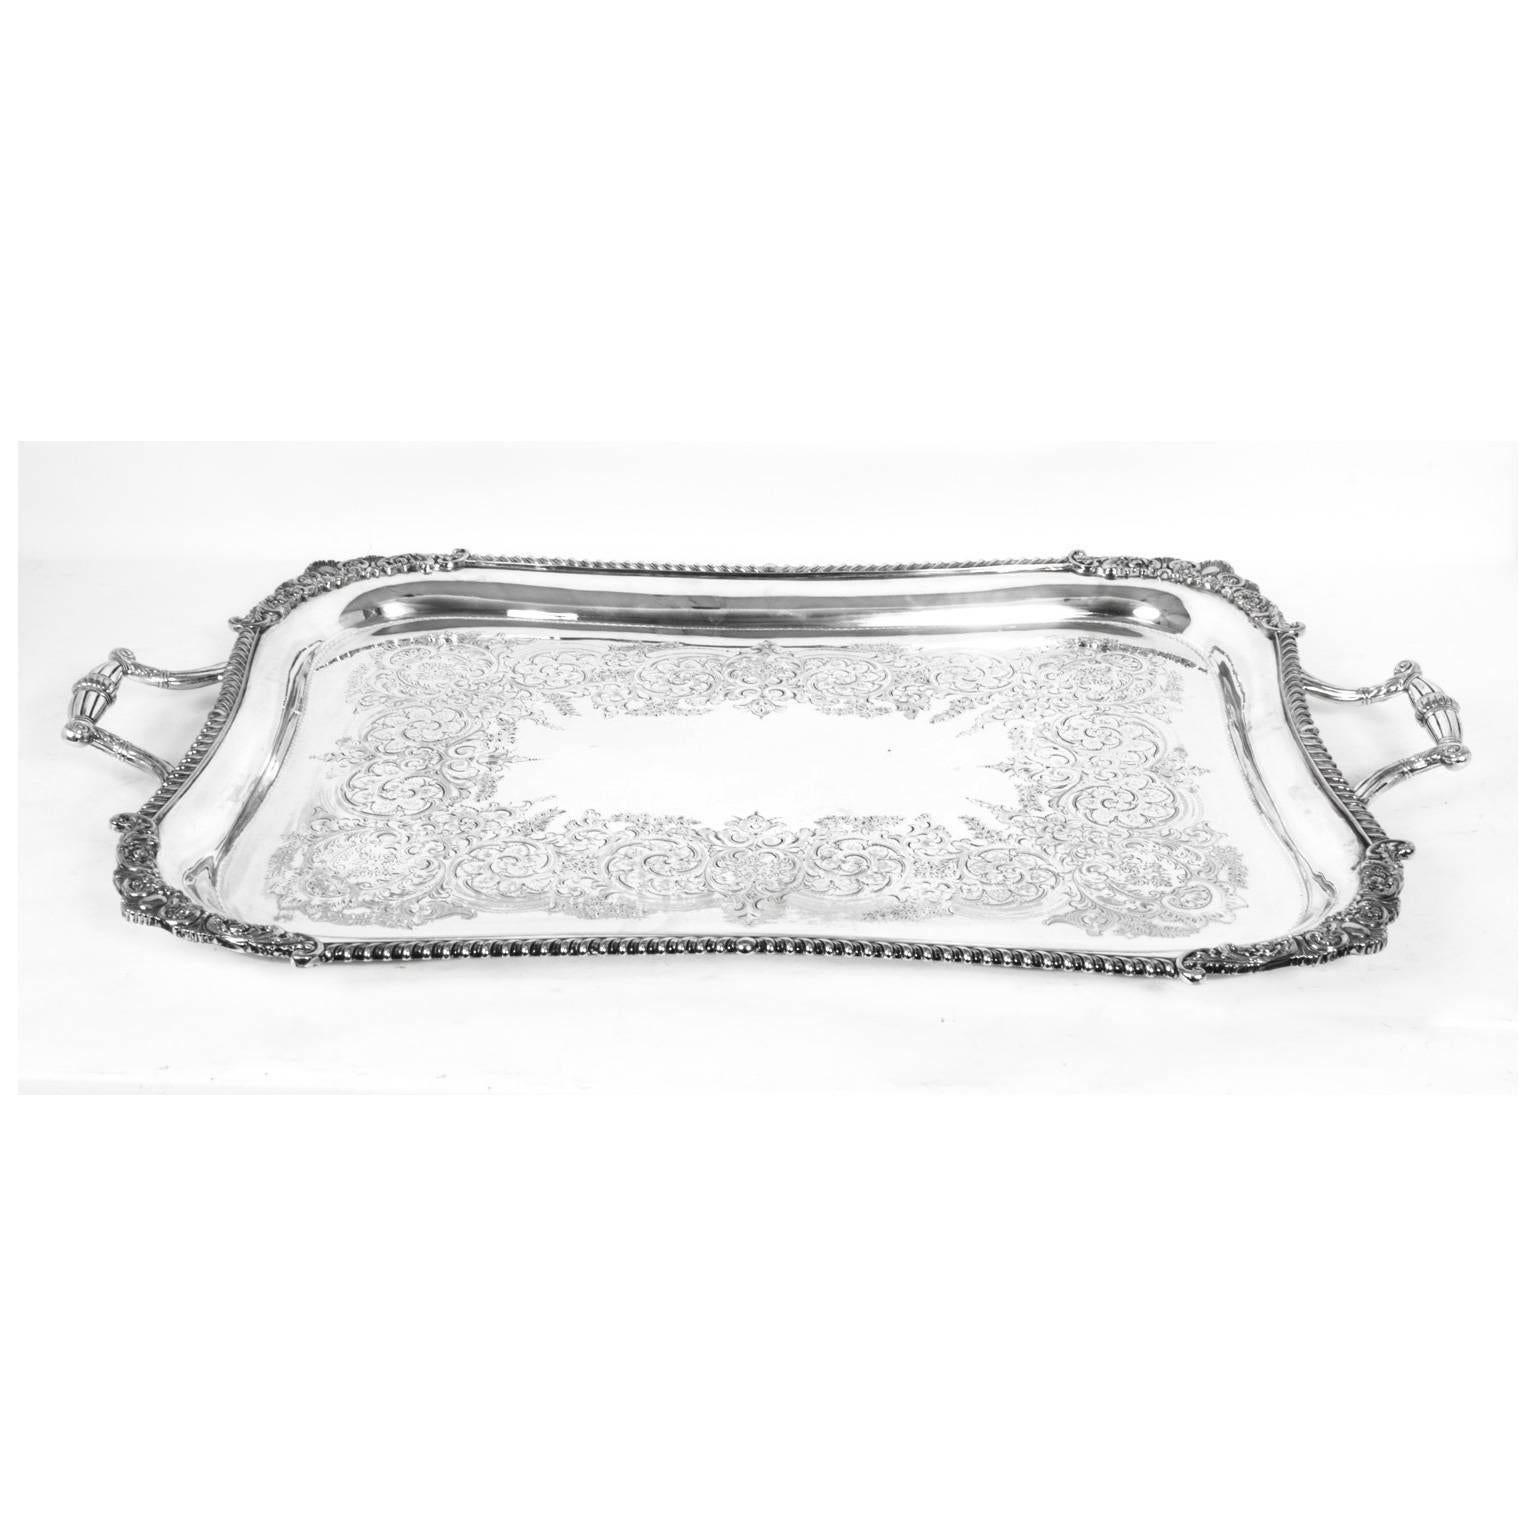 This is a lovely antique English Victorian silver plated tray with makers marks for the eminent silversmith William Hutton & Sons of West Street Sheffield, circa 1870.

This large rectangular silver plated tray features a deep set, decorative